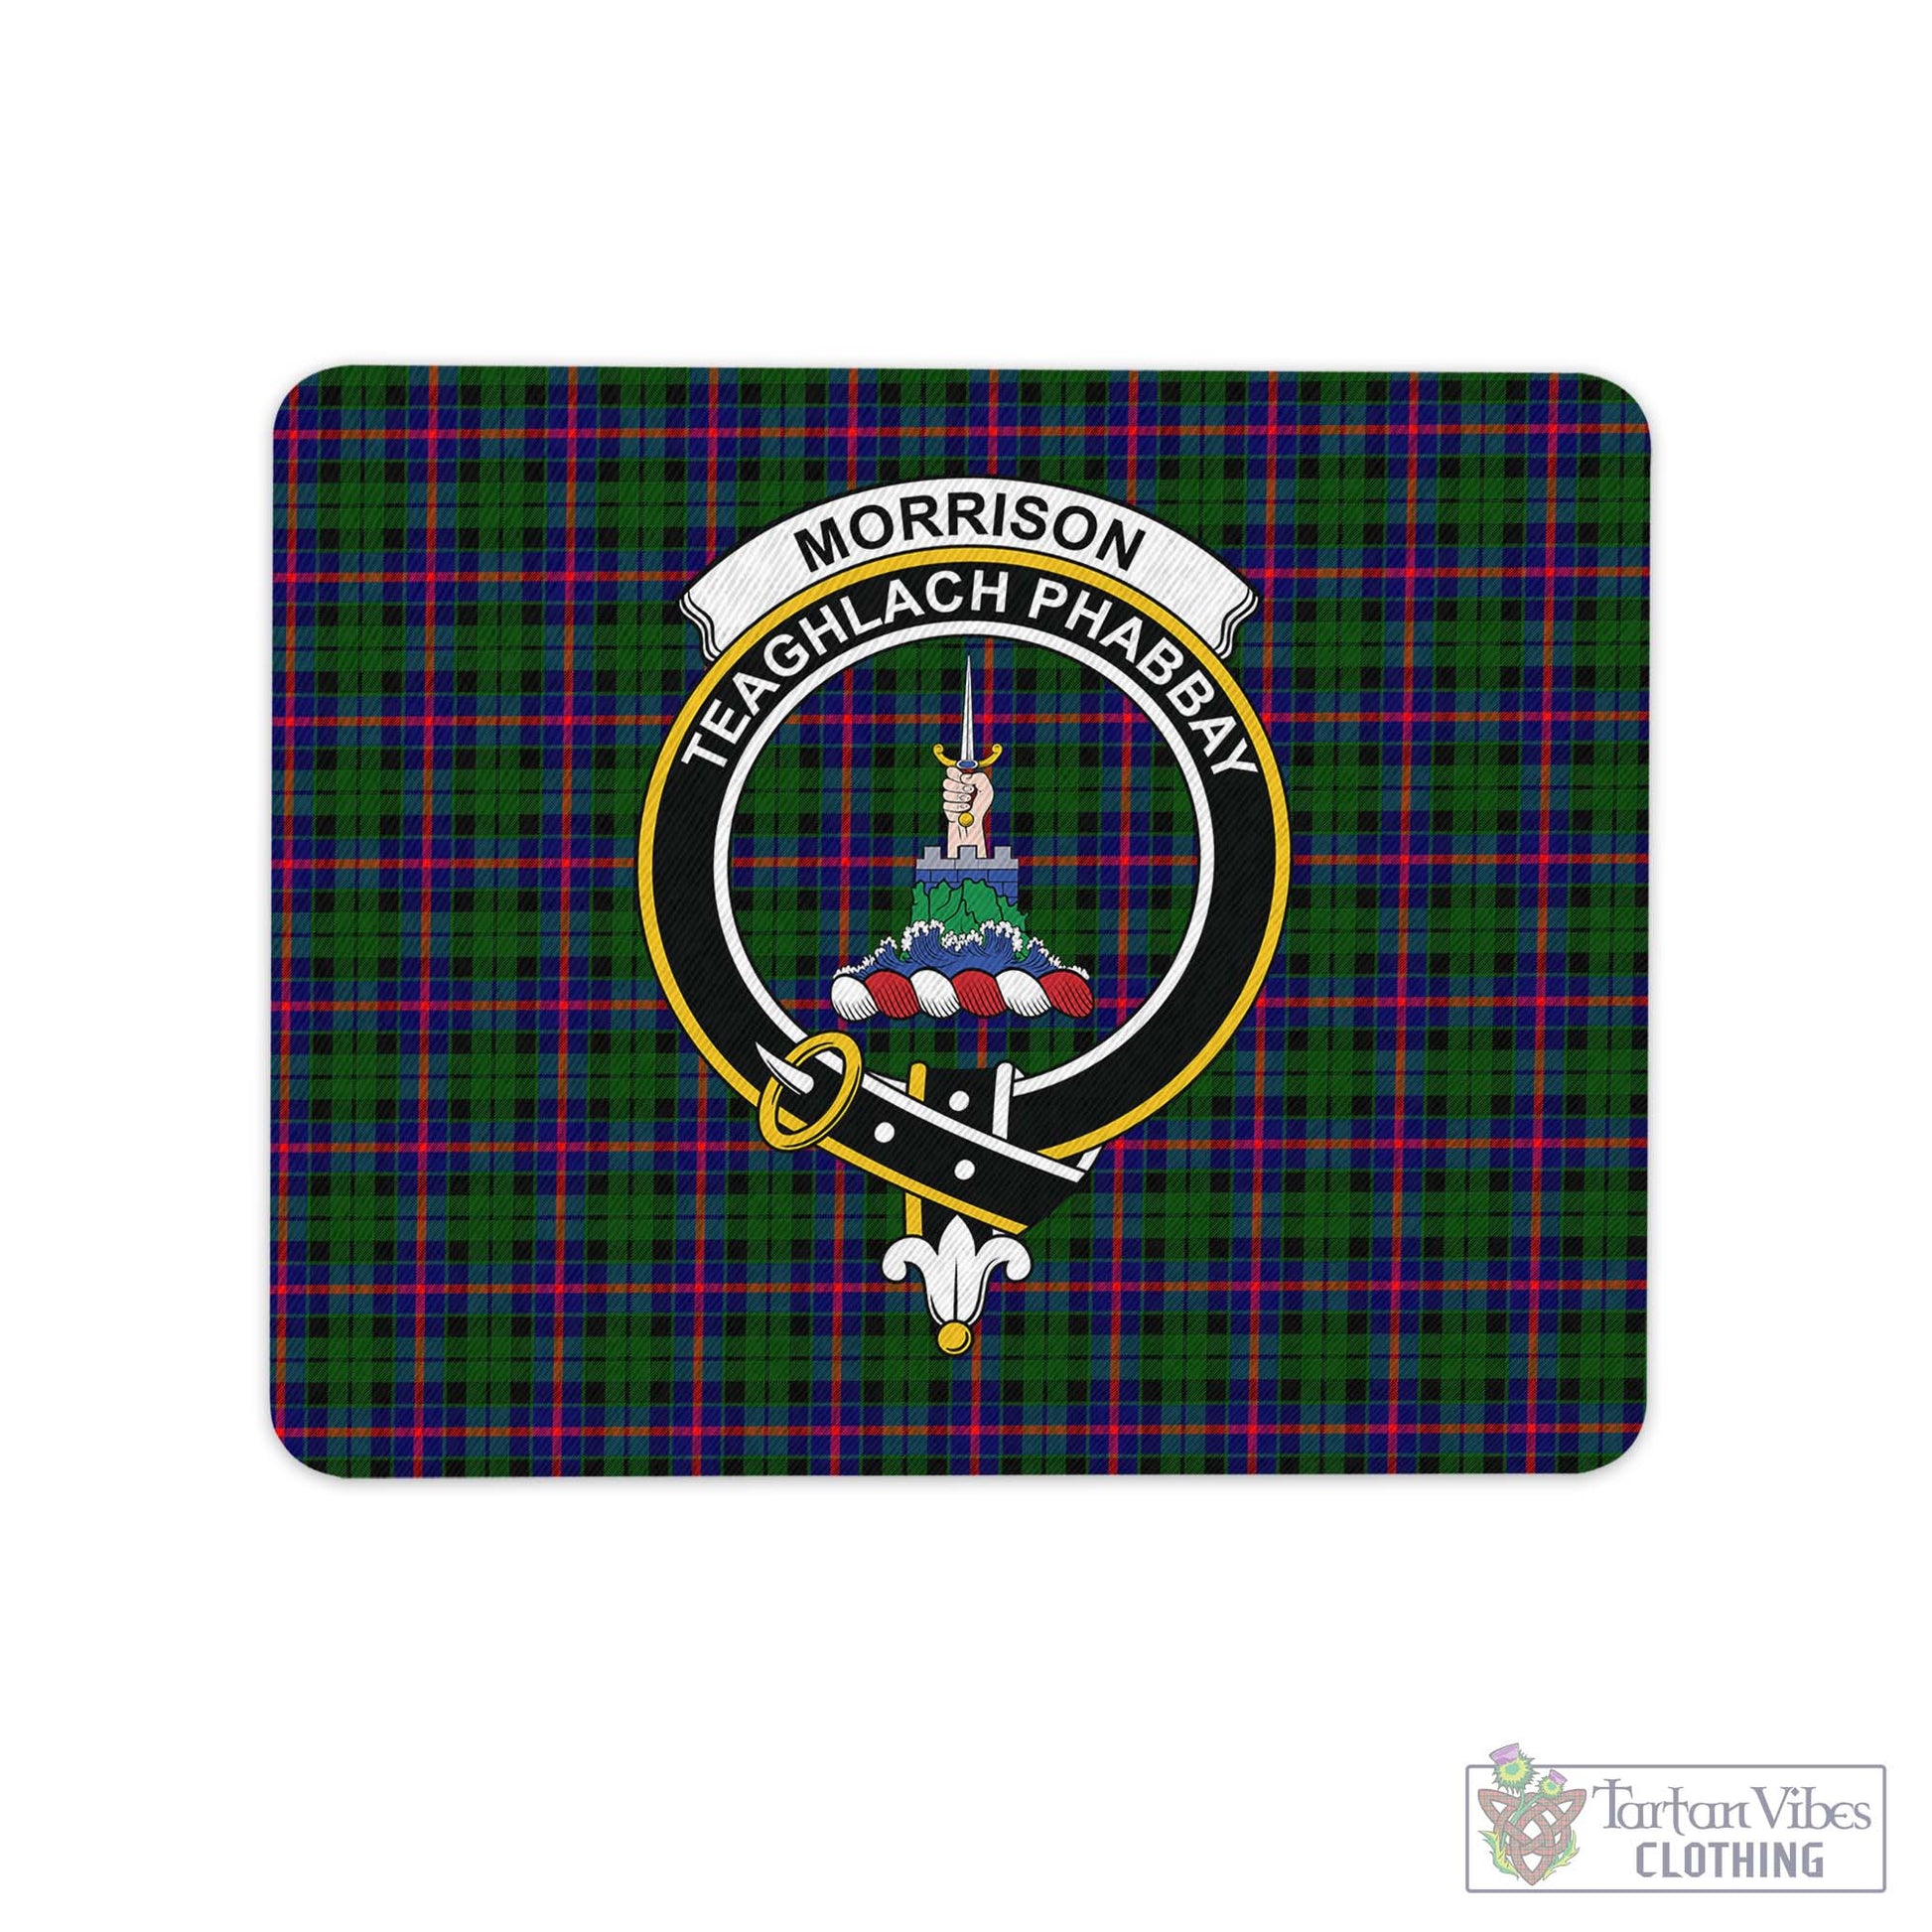 Tartan Vibes Clothing Morrison Modern Tartan Mouse Pad with Family Crest